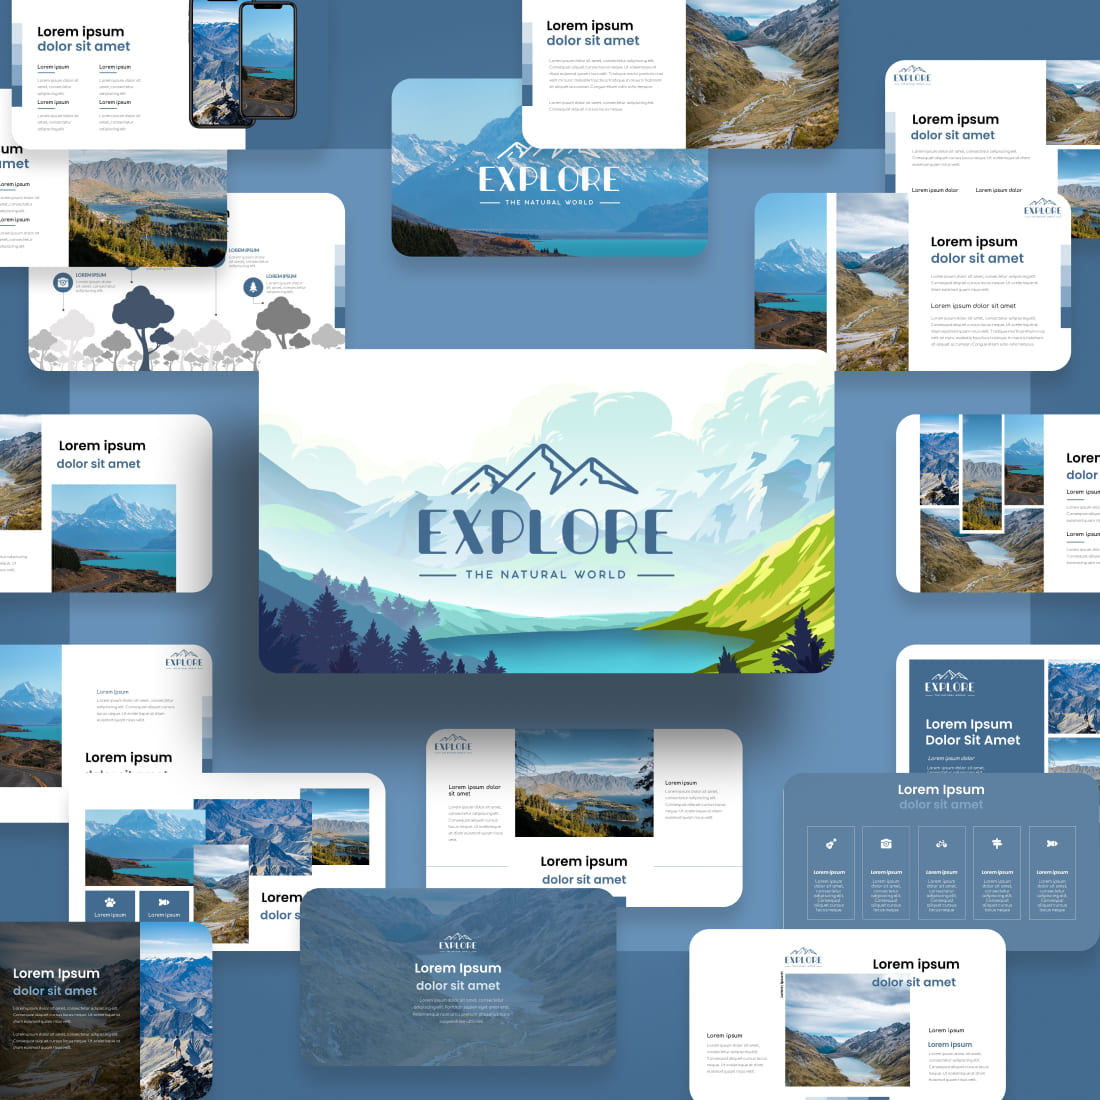 Explore Travel Keynote Template cover image.